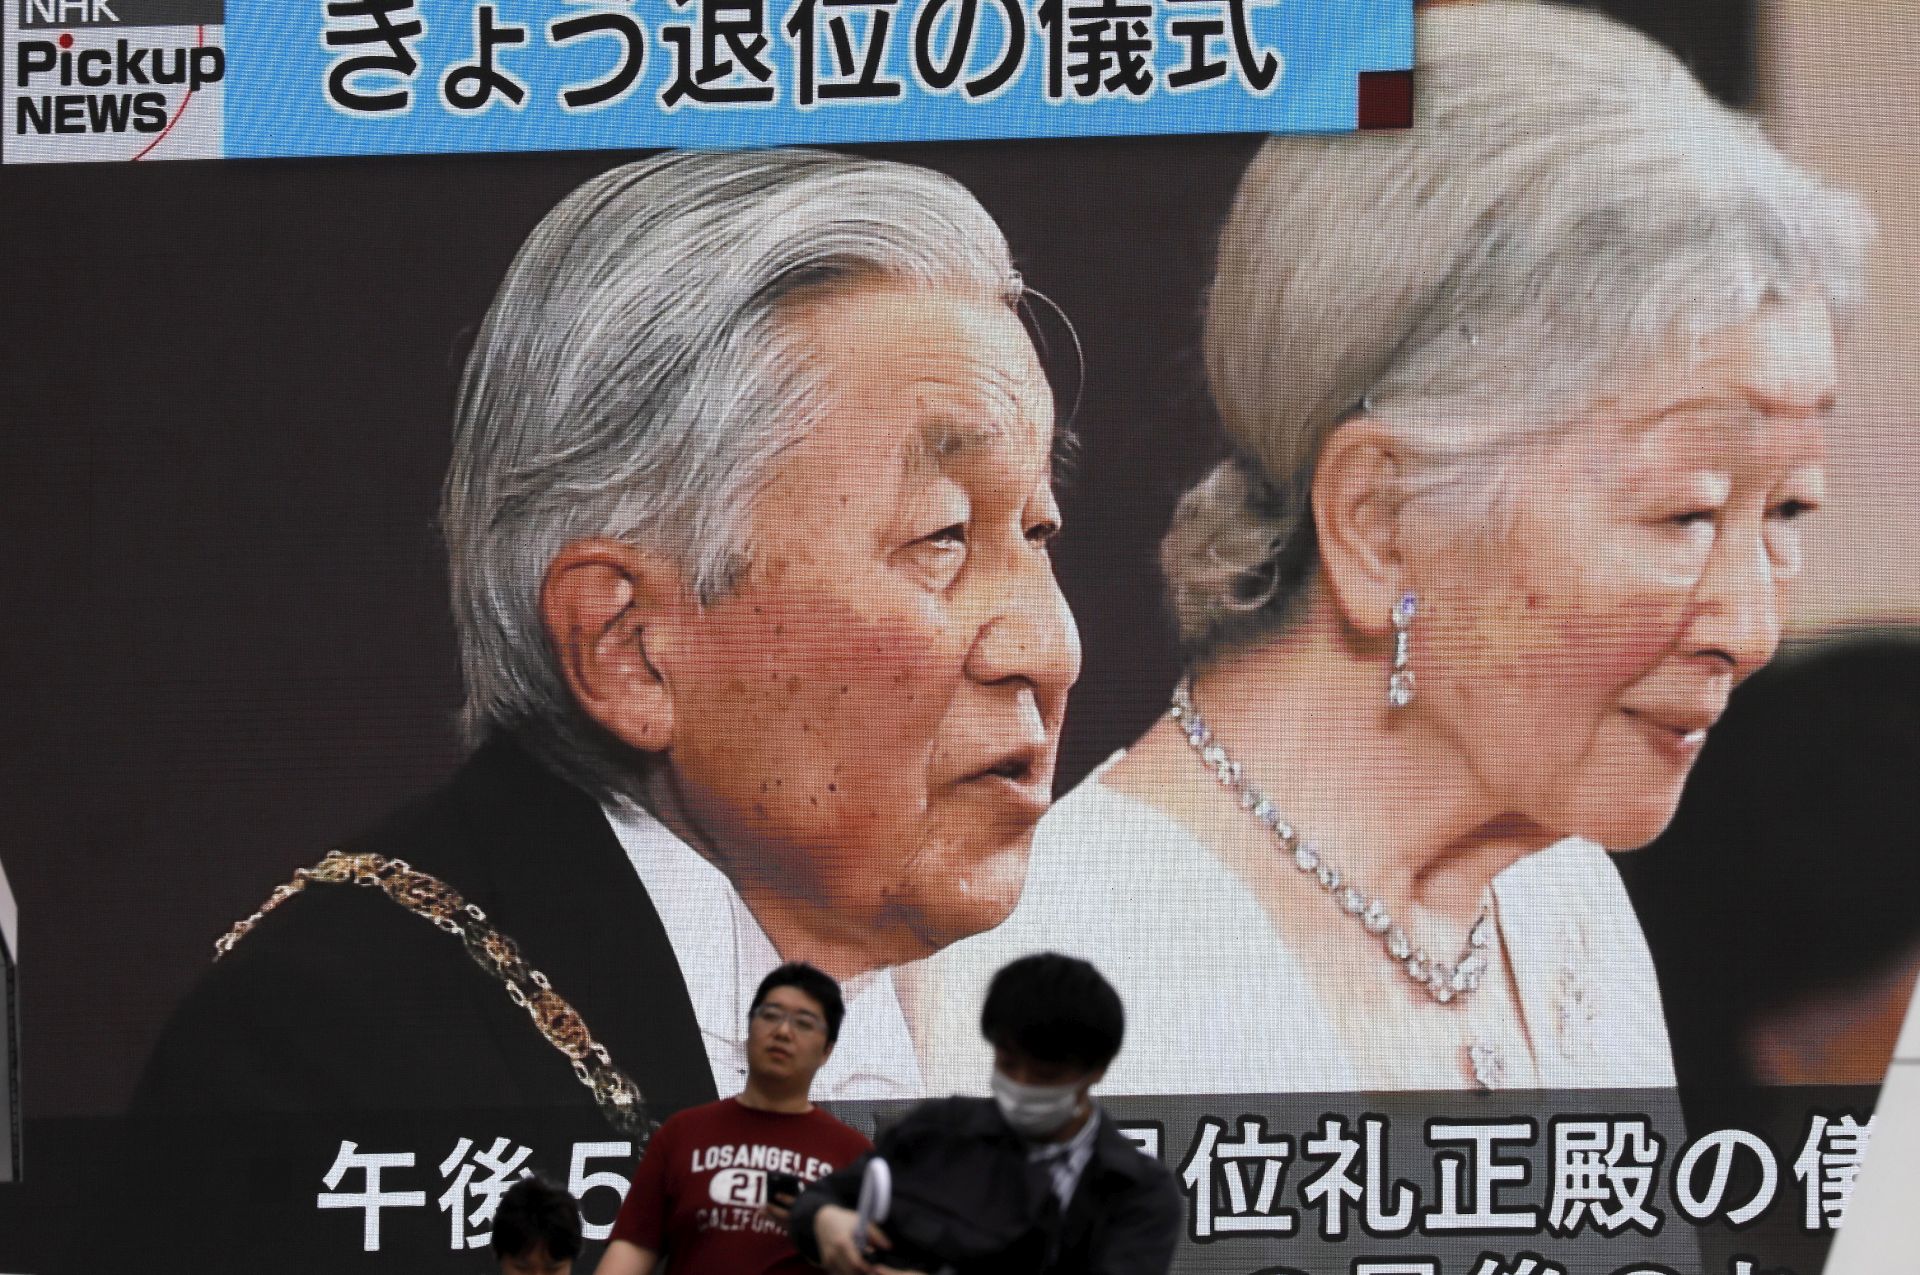 epa07537392 A huge screen displays news of abdication of Japan's Emperor Akihito in Tokyo, Japan, 30 April 2019. Emperor Akihito, 85, is the first Japanese emperor to abdicate the throne in the modern era. His successor is his eldest son, who will be crowned emperor on 01 May, which will mark the beginning of the Reiwa period. He is expected to formally ascend to the throne during an enthronement ceremony in October 2019.  EPA/KIMIMASA MAYAMA